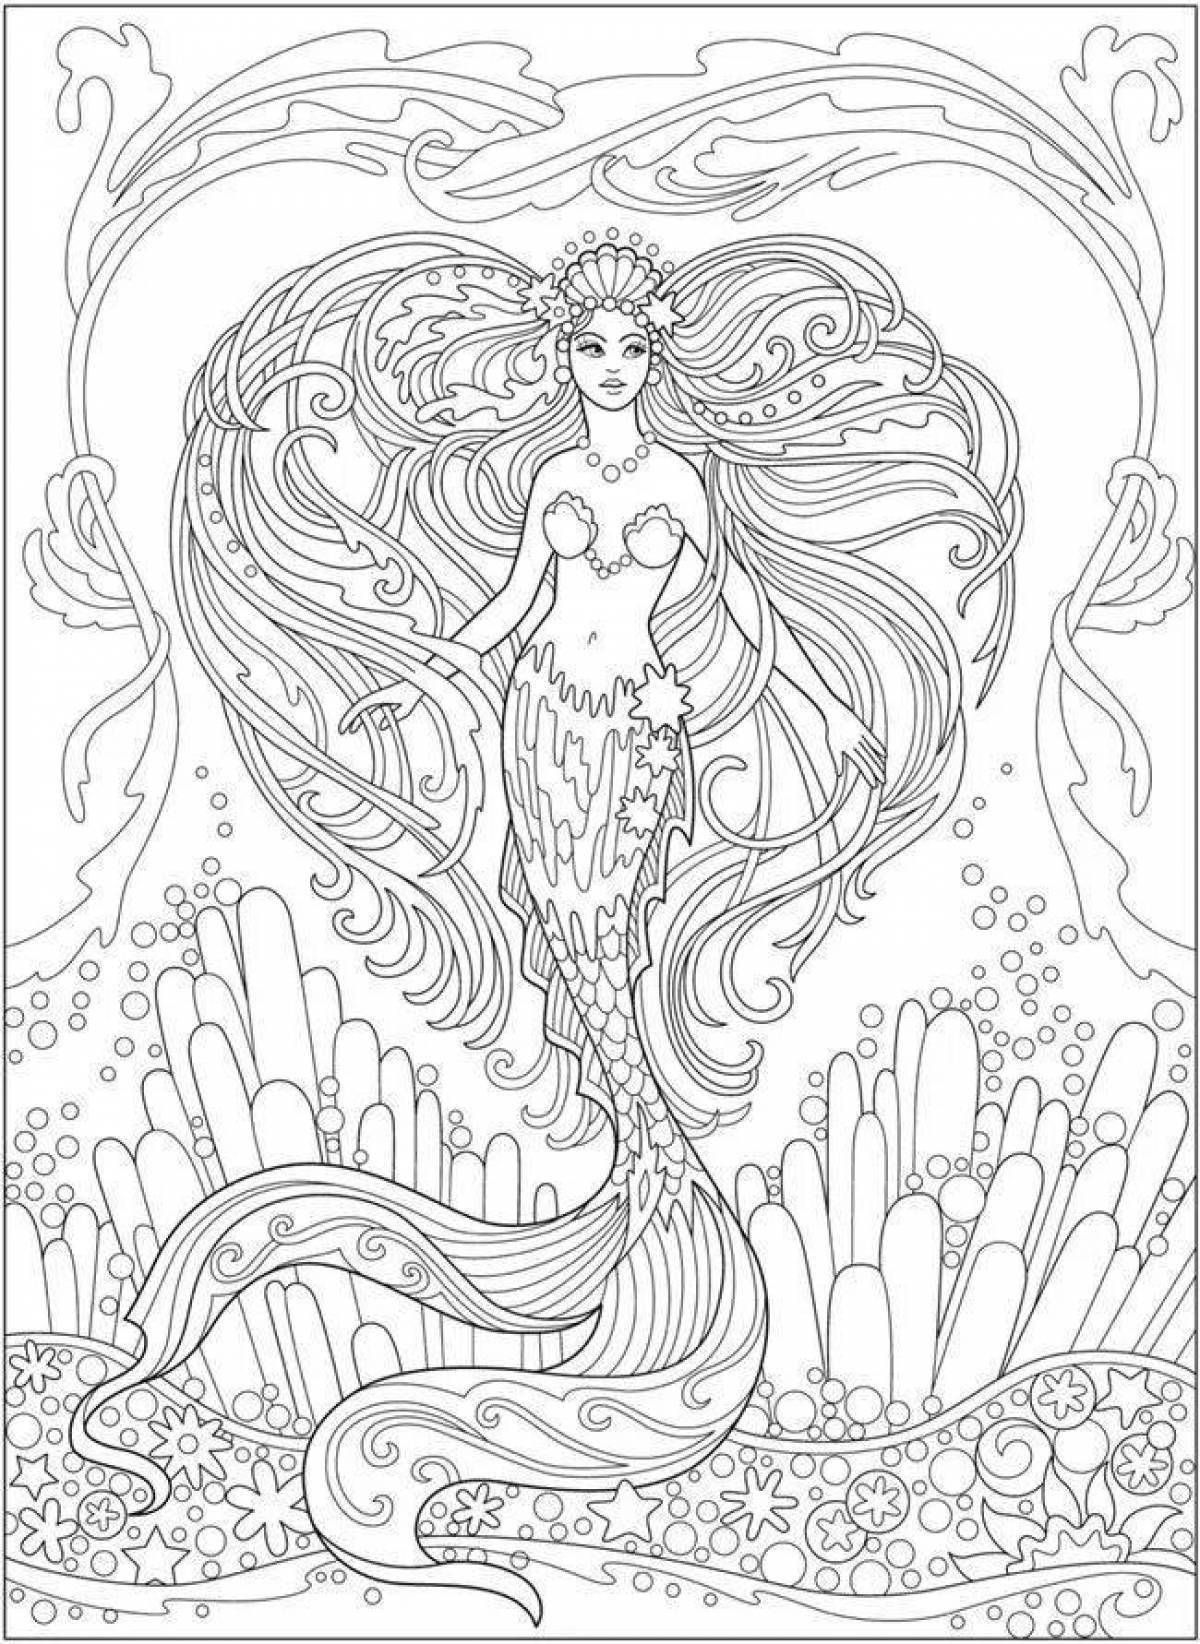 Friendly mermaid coloring pages for girls